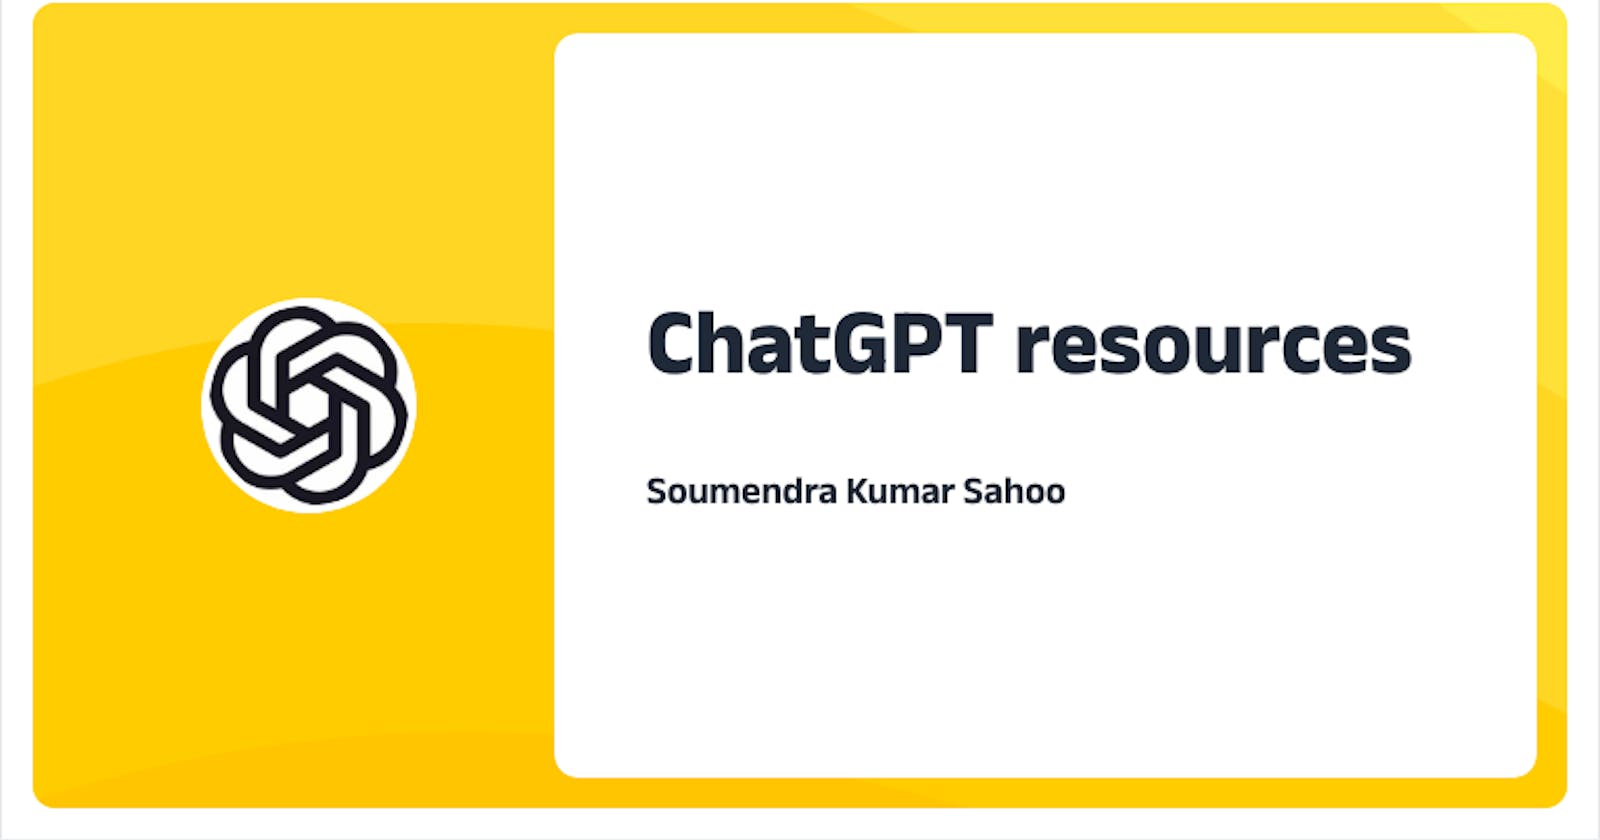 ChatGPT resources